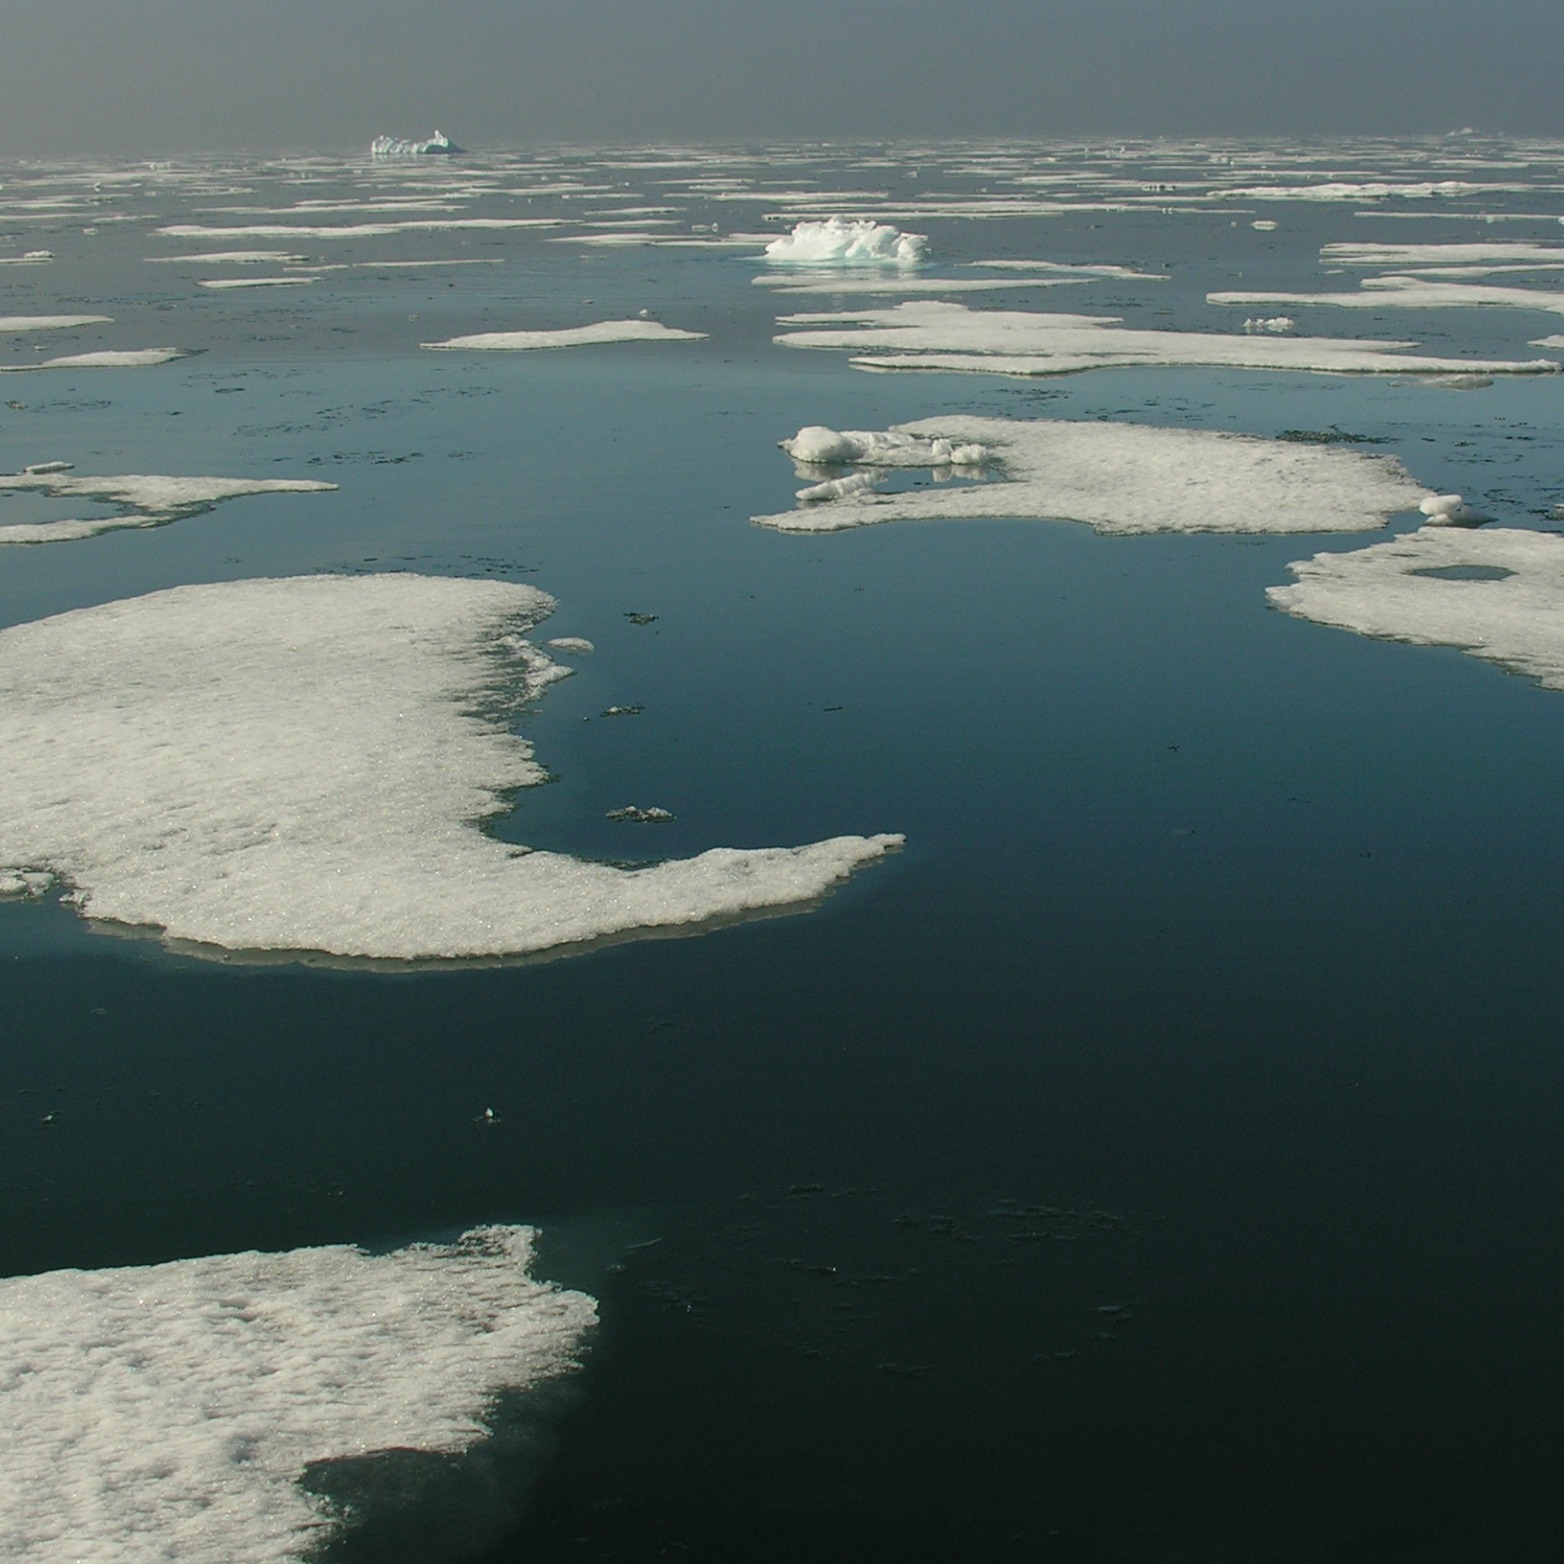 The Arctic is already a sink for microplastics transported from distant sources